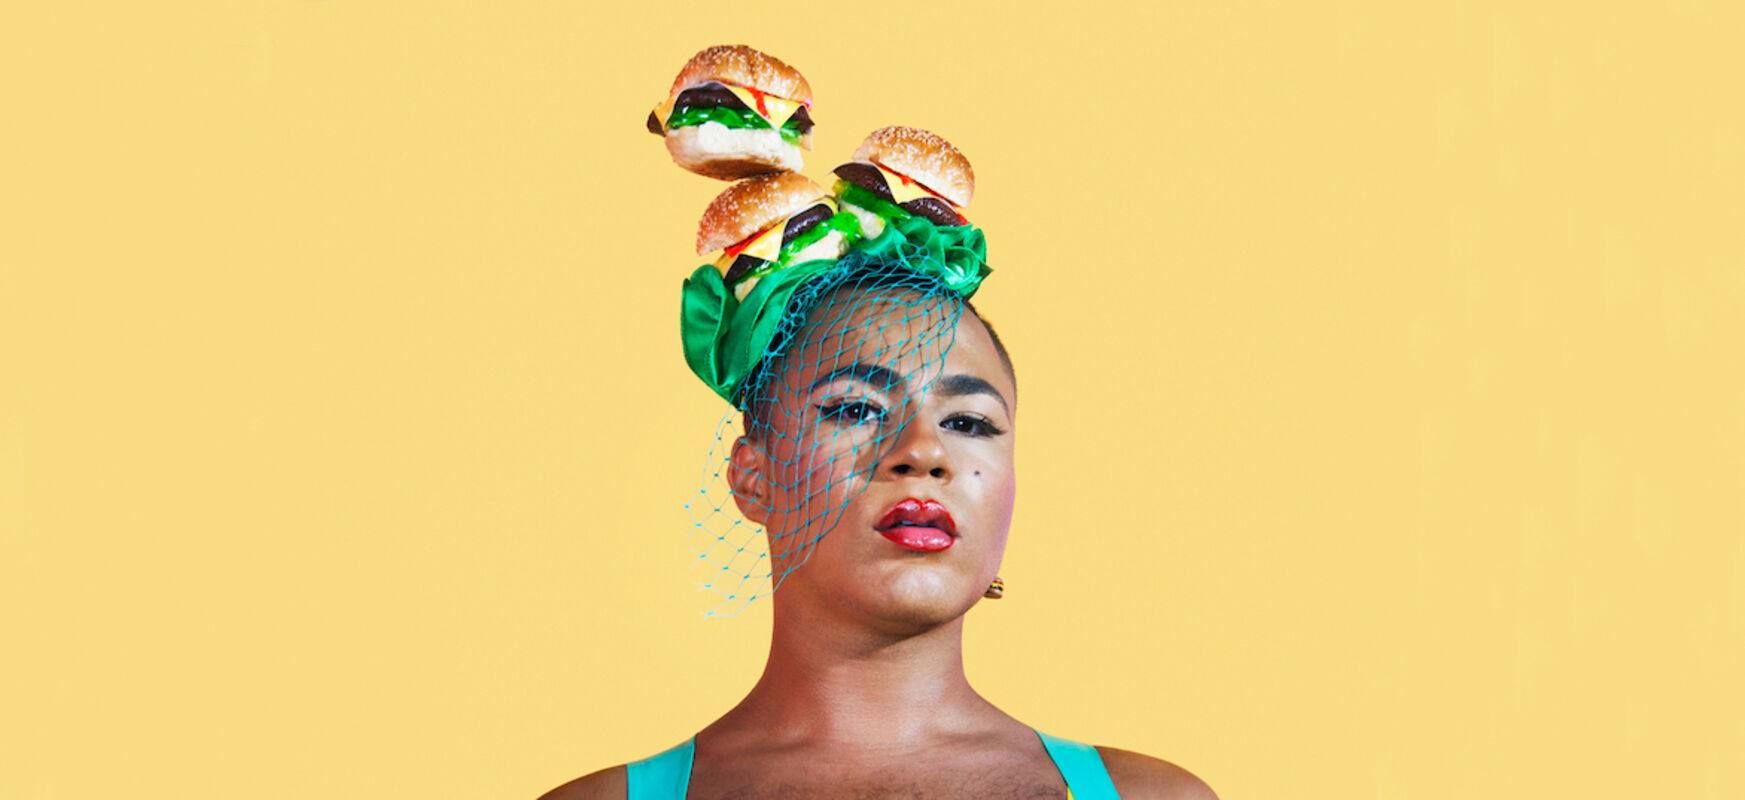 Portrait of the head of the performance artist and activist Travis Alabanza. They is wearing a hat decorated with burgers.